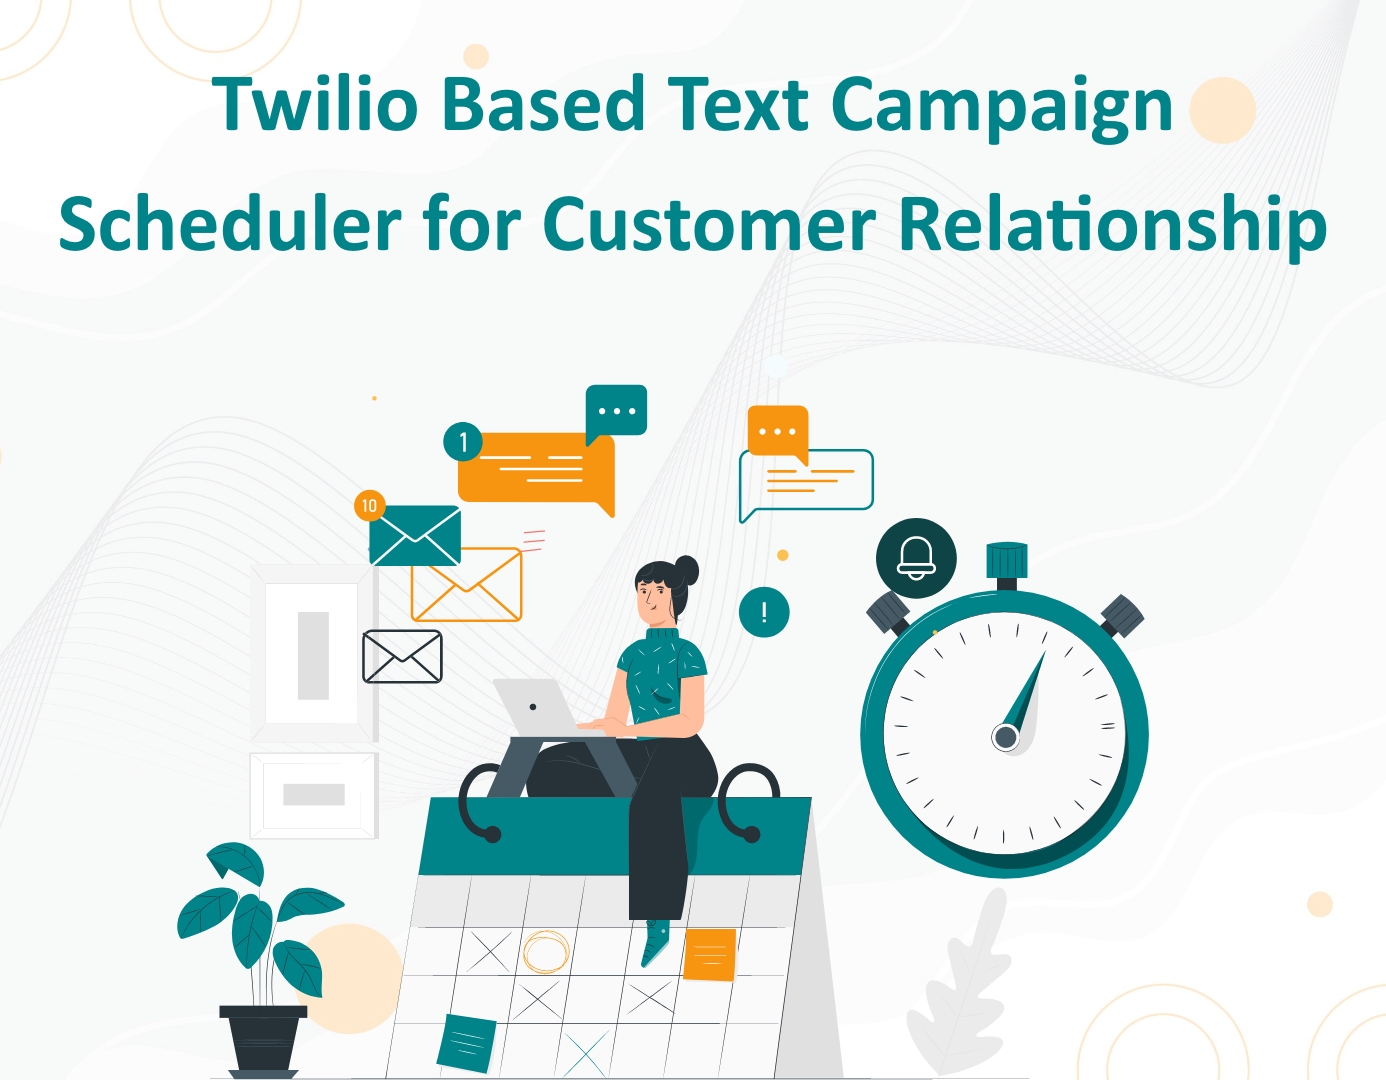 Twilio Based Text Campaign Scheduler for Customer Relationship